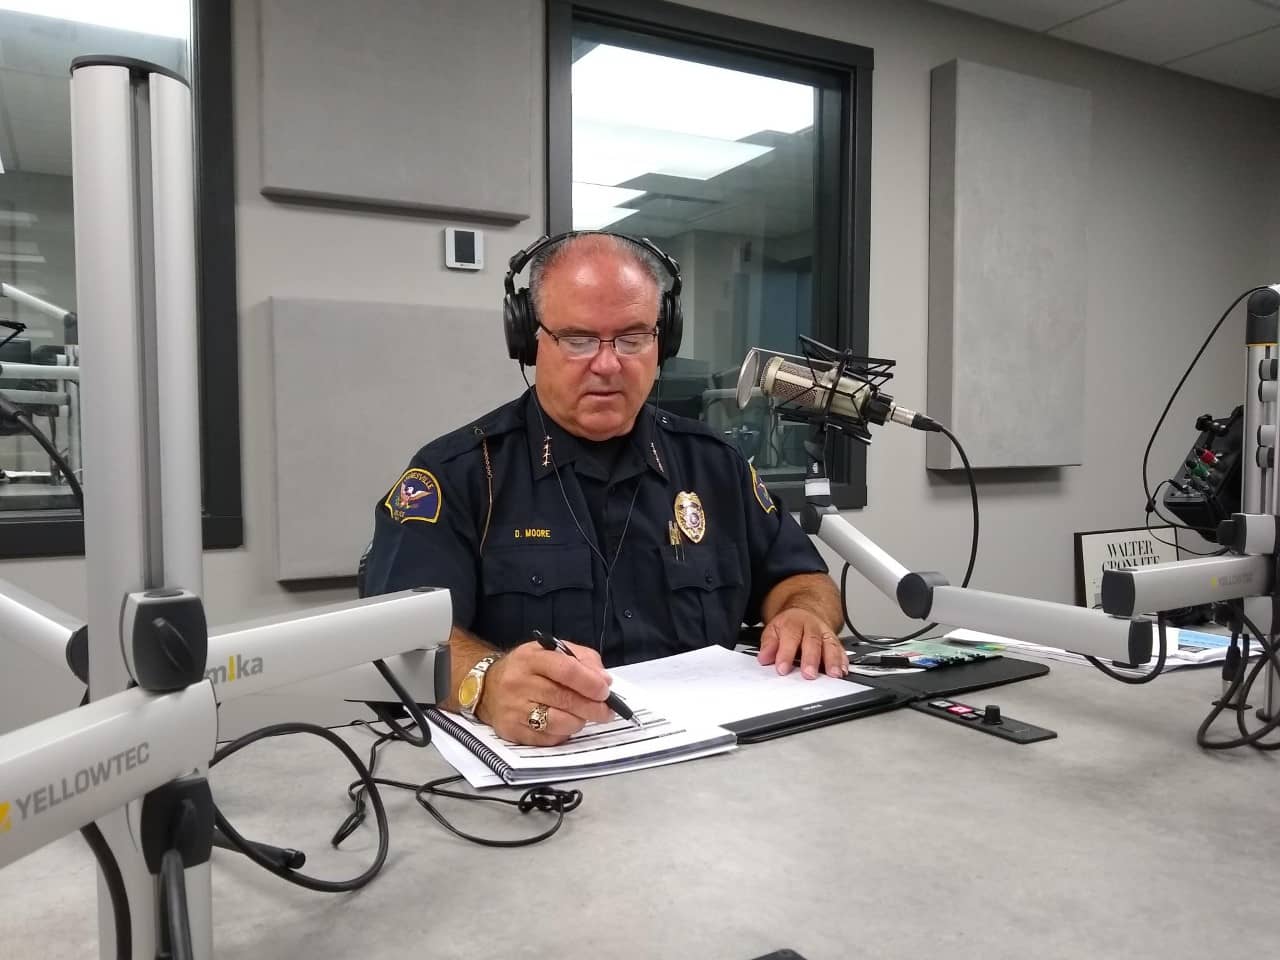 janesville-police-chief-dave-moore-joins-your-talk-show-on-wclo